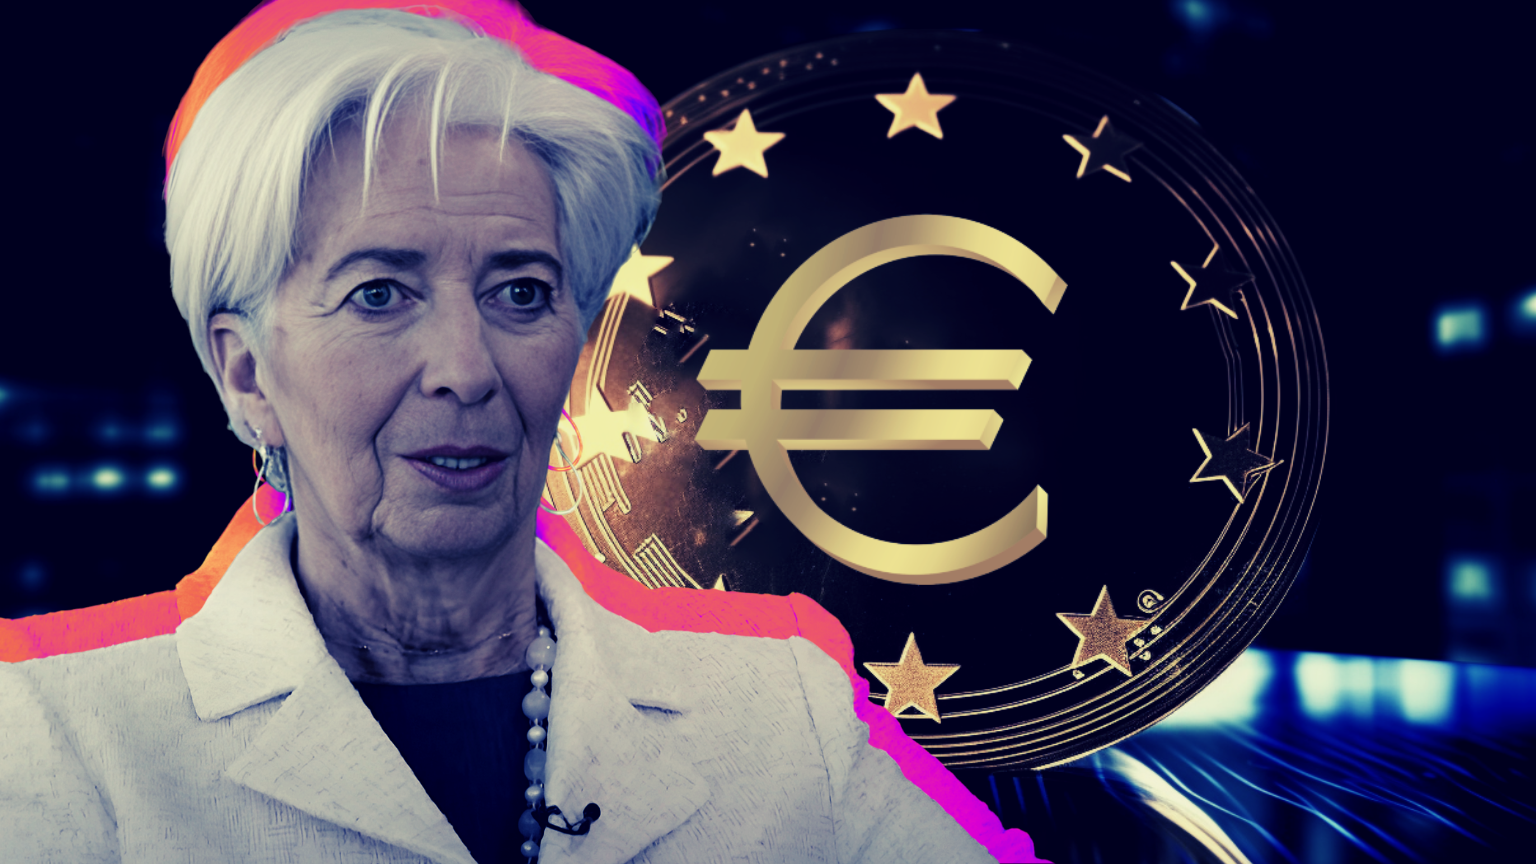 Revealed: This Is How Central Banks Will Quietly Push CBDCs By Stealth